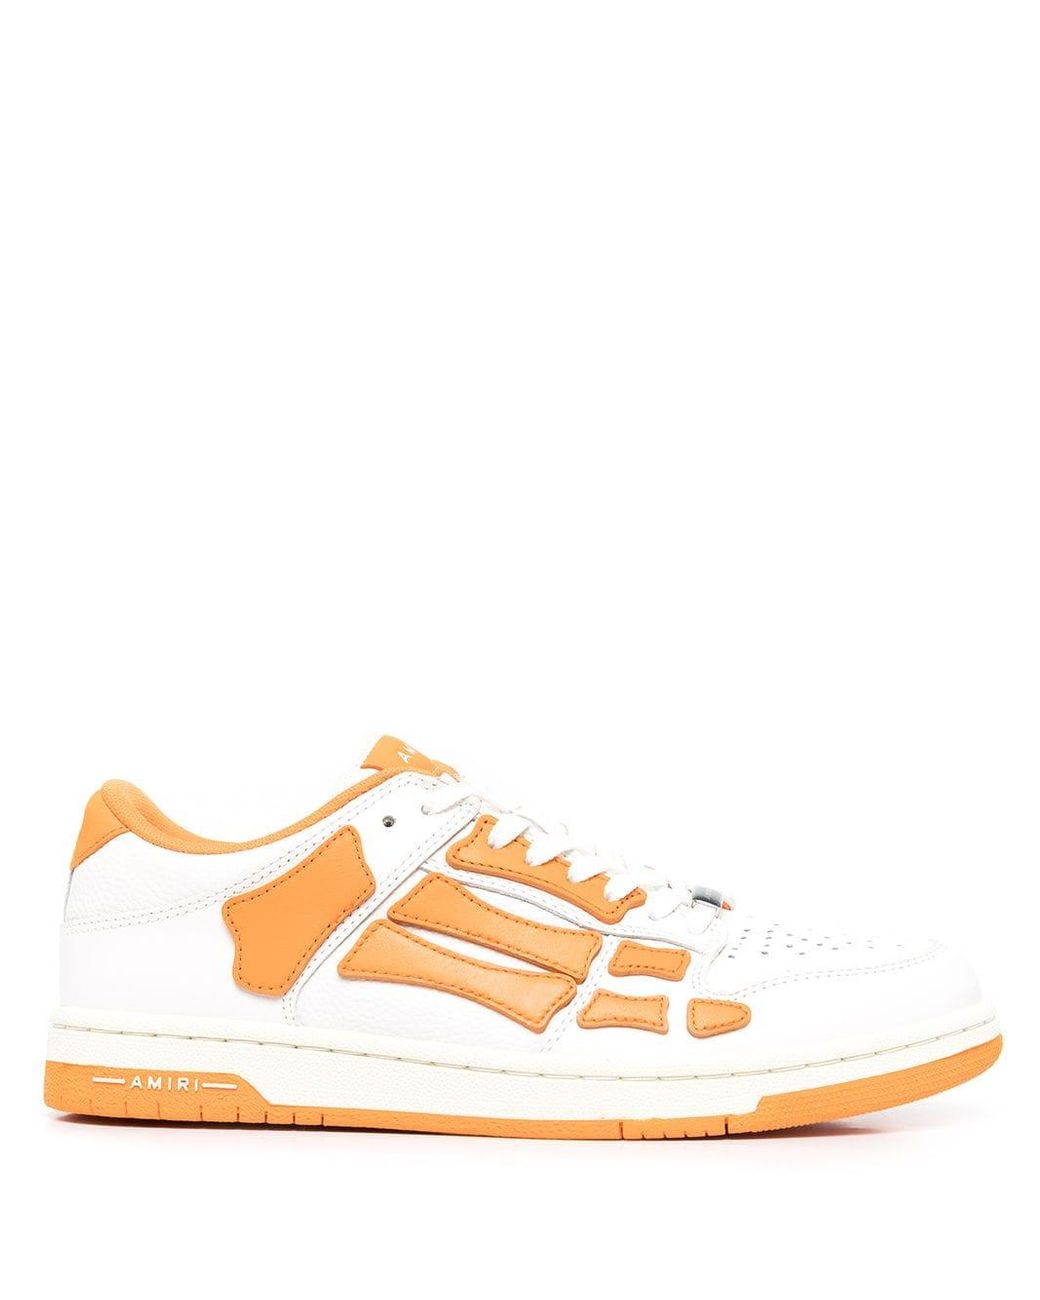 Amiri Leather Patch-detail Lace-up Sneakers in Orange for Men | Lyst